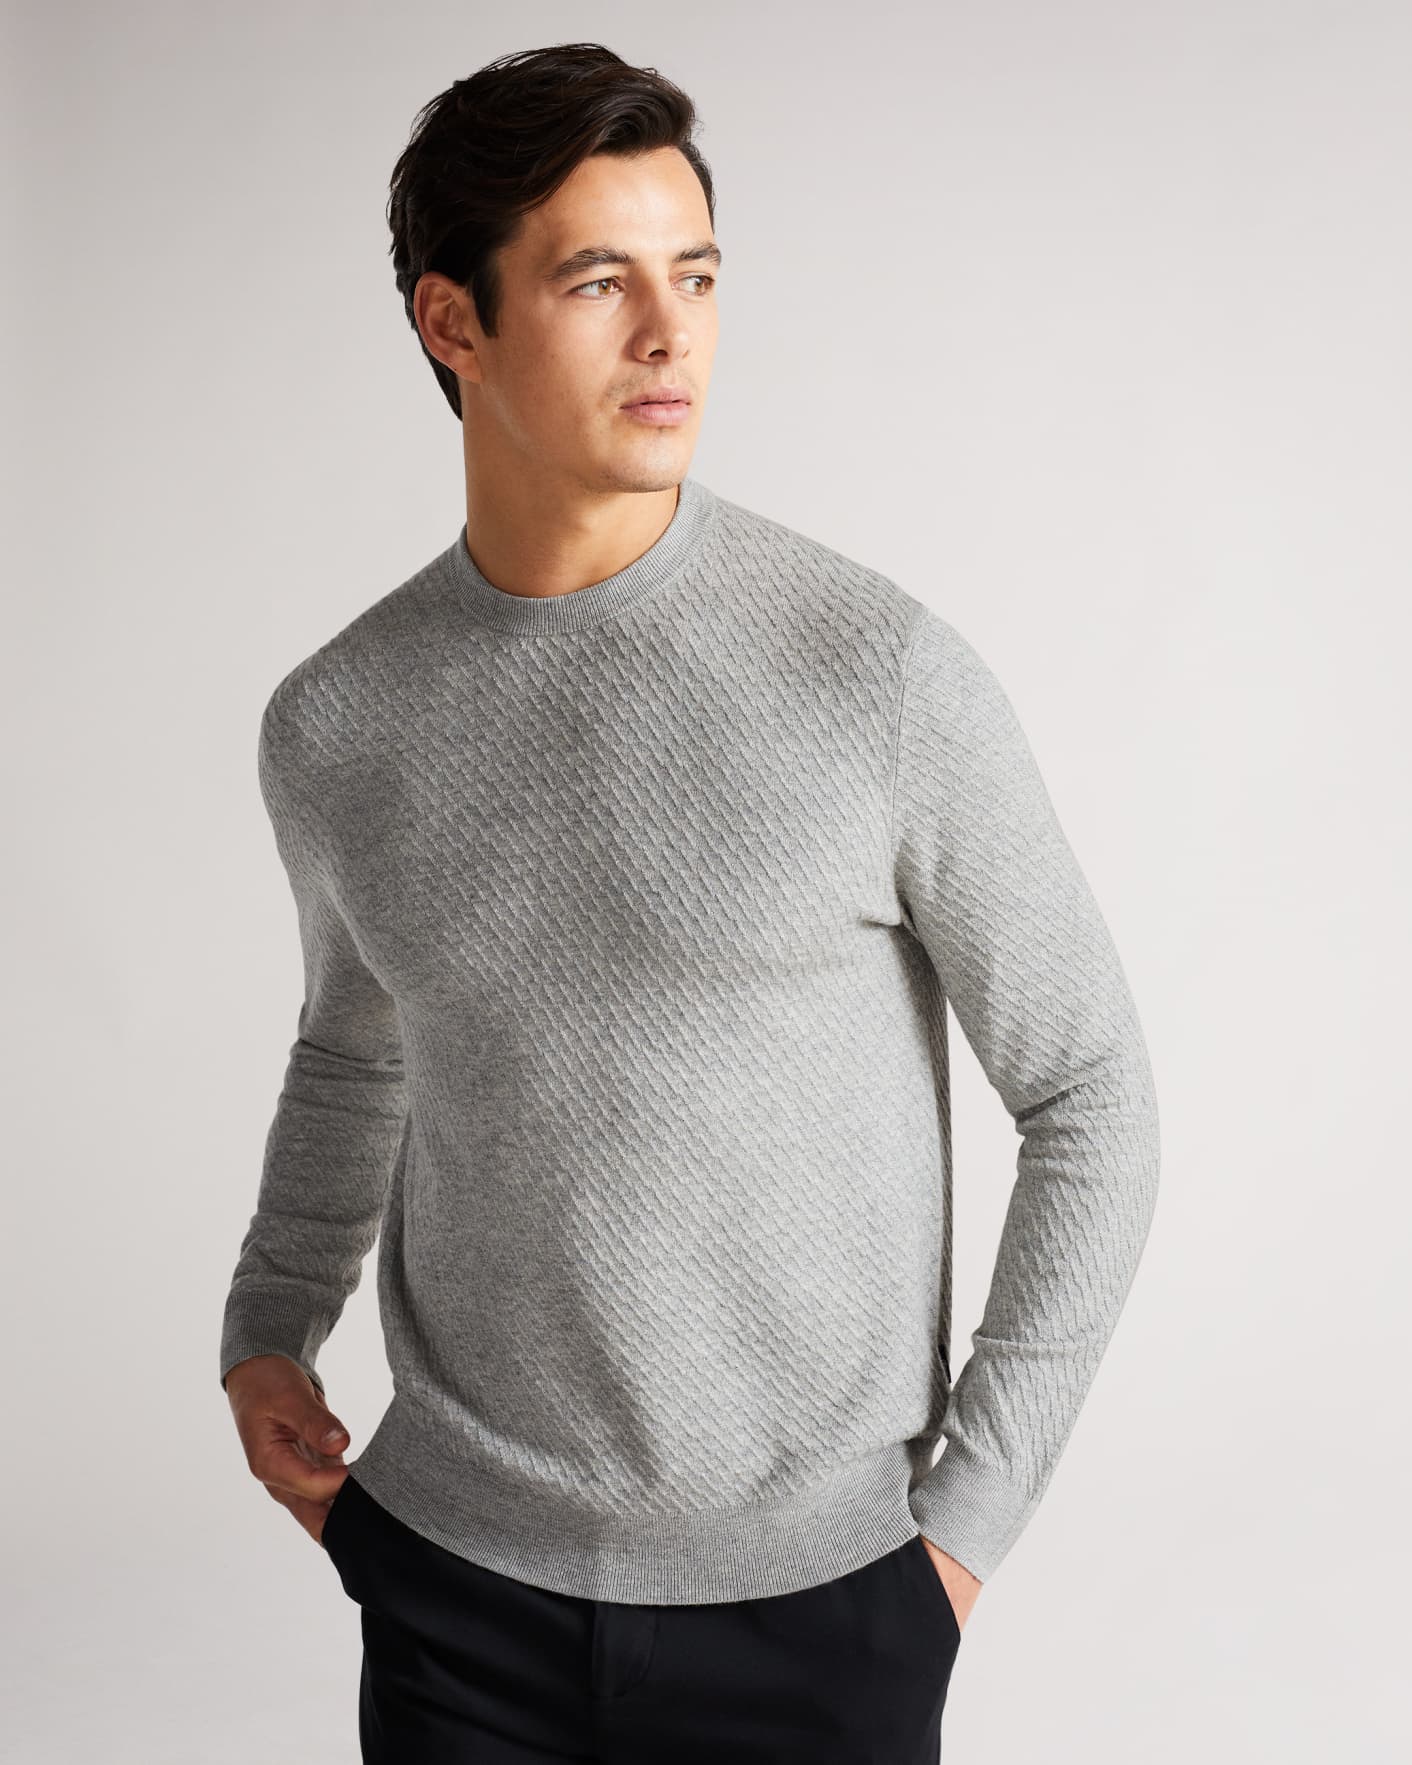 Mens Crew Neck Long Sleeve Sweater Marl Ribbed Knitted Winter Pullover Jumper